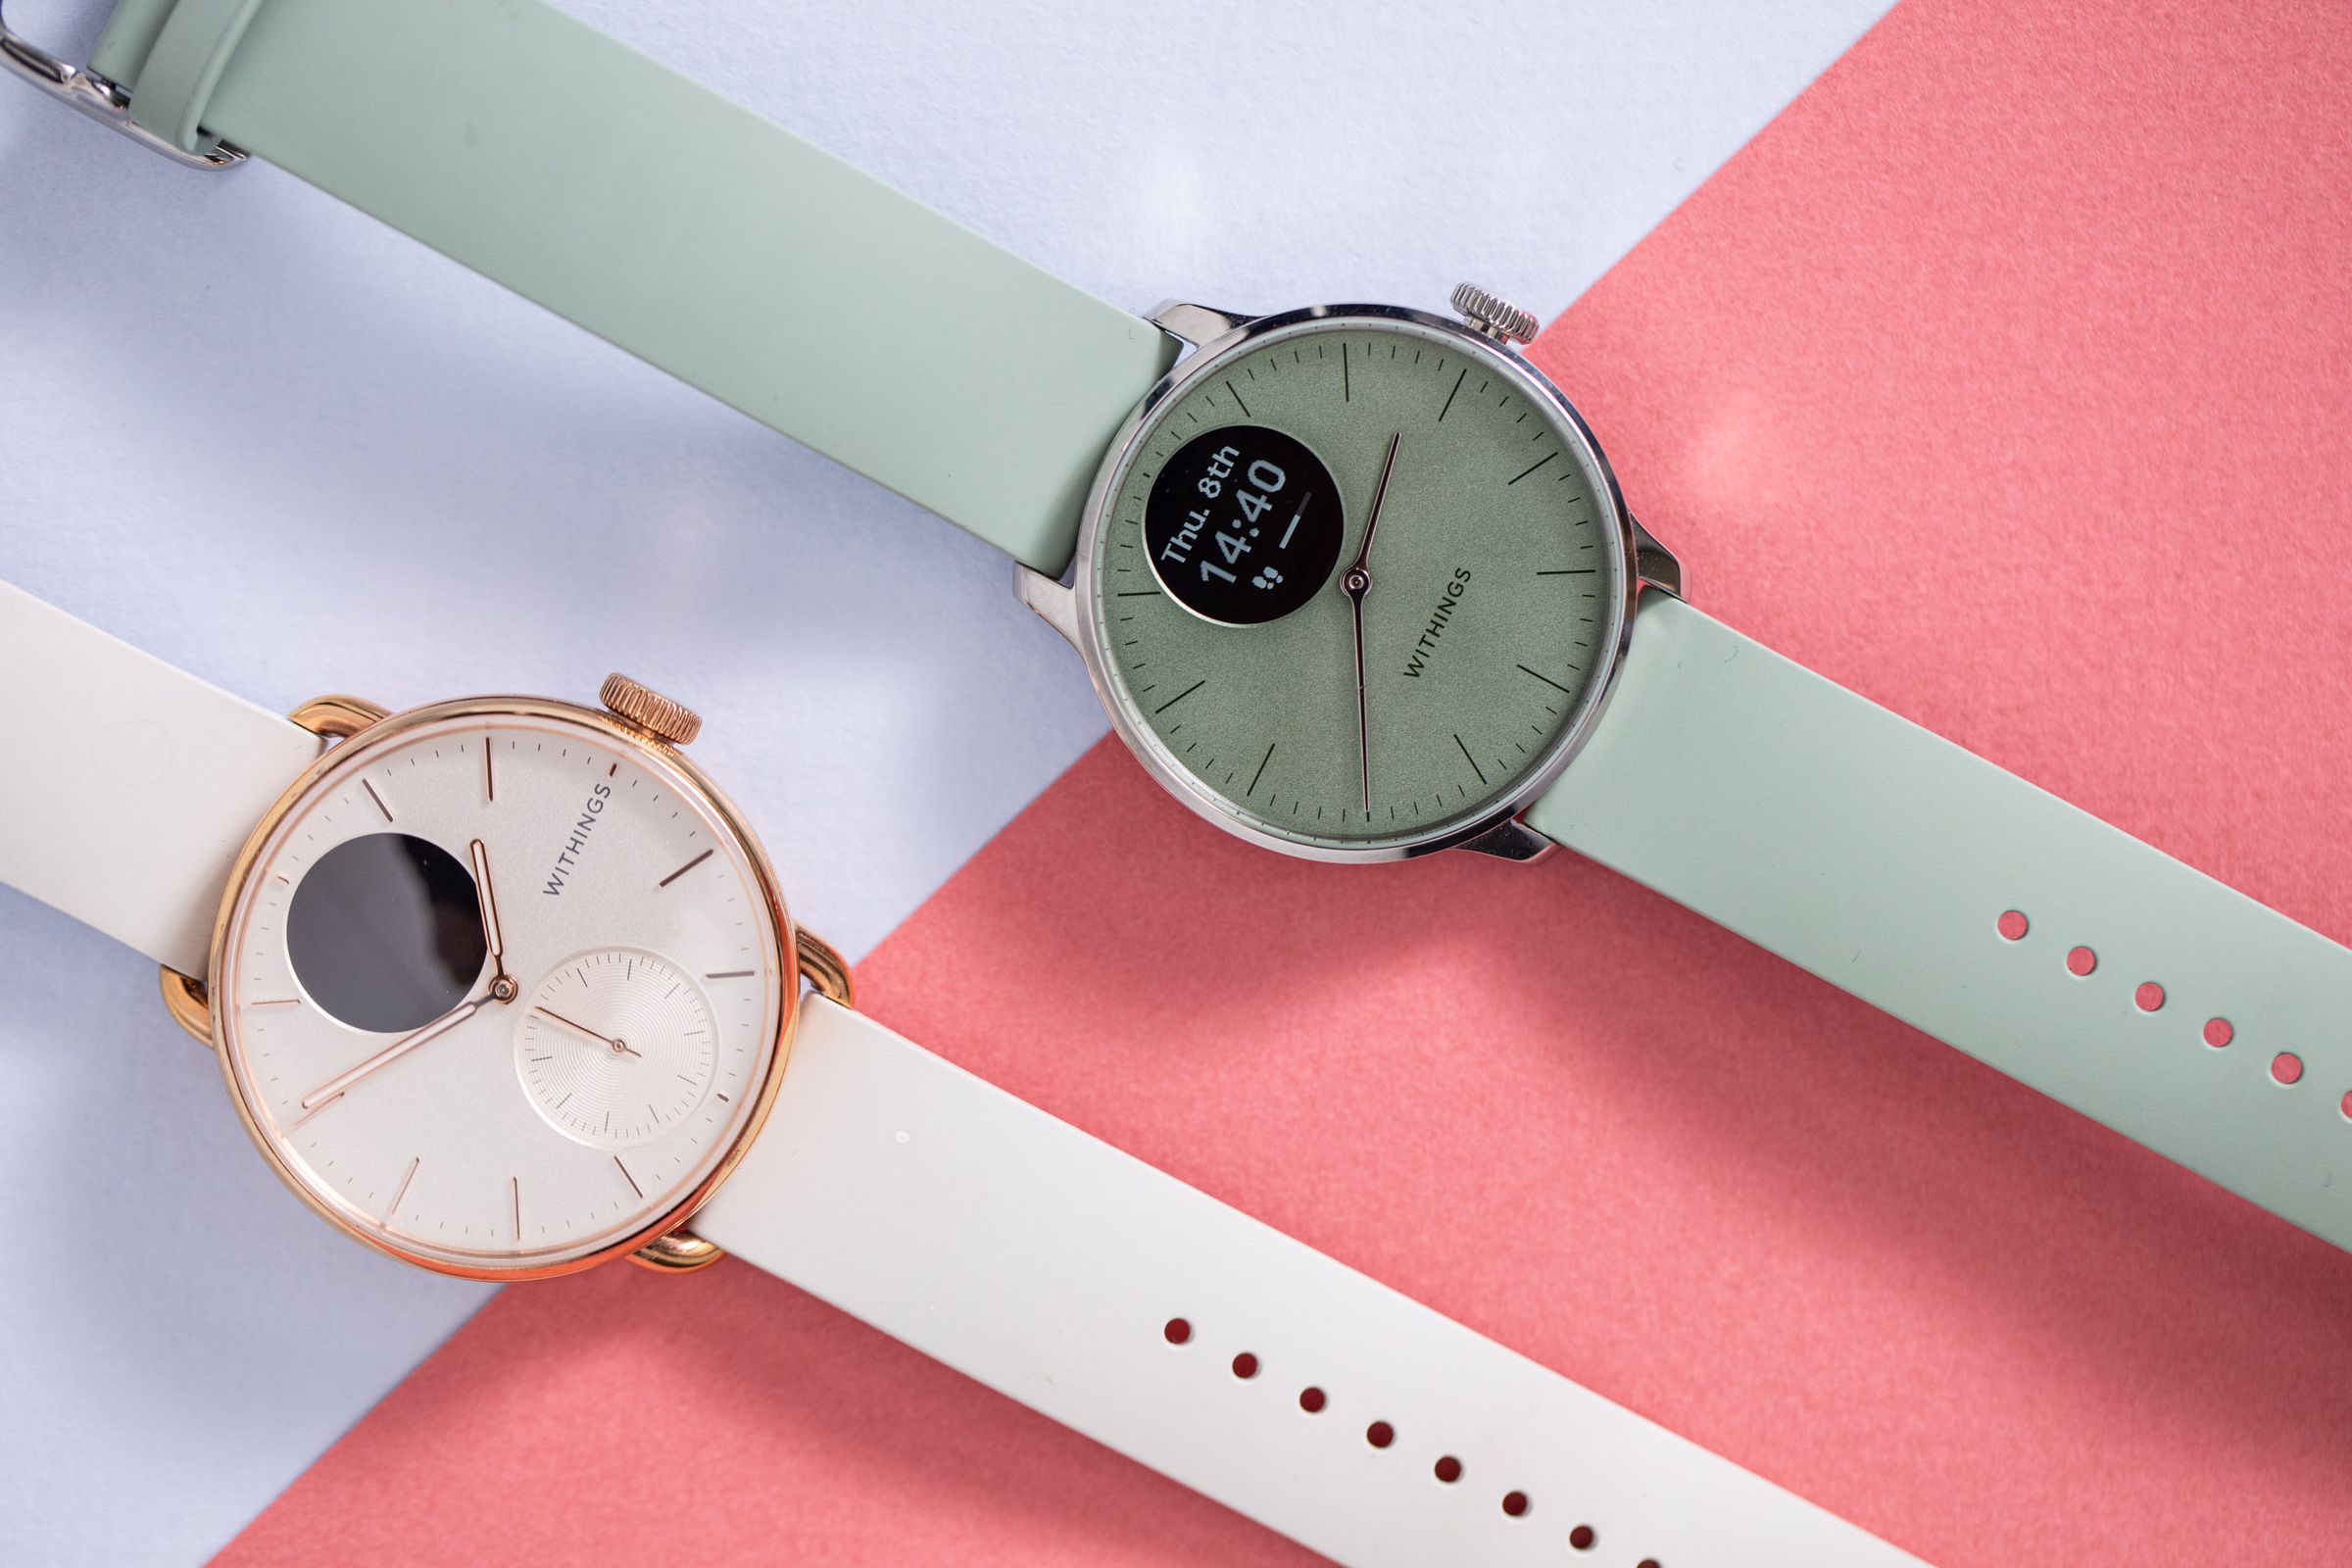 The Withings ScanWatch 2 and ScanWatch Light side by side on a colorful background.